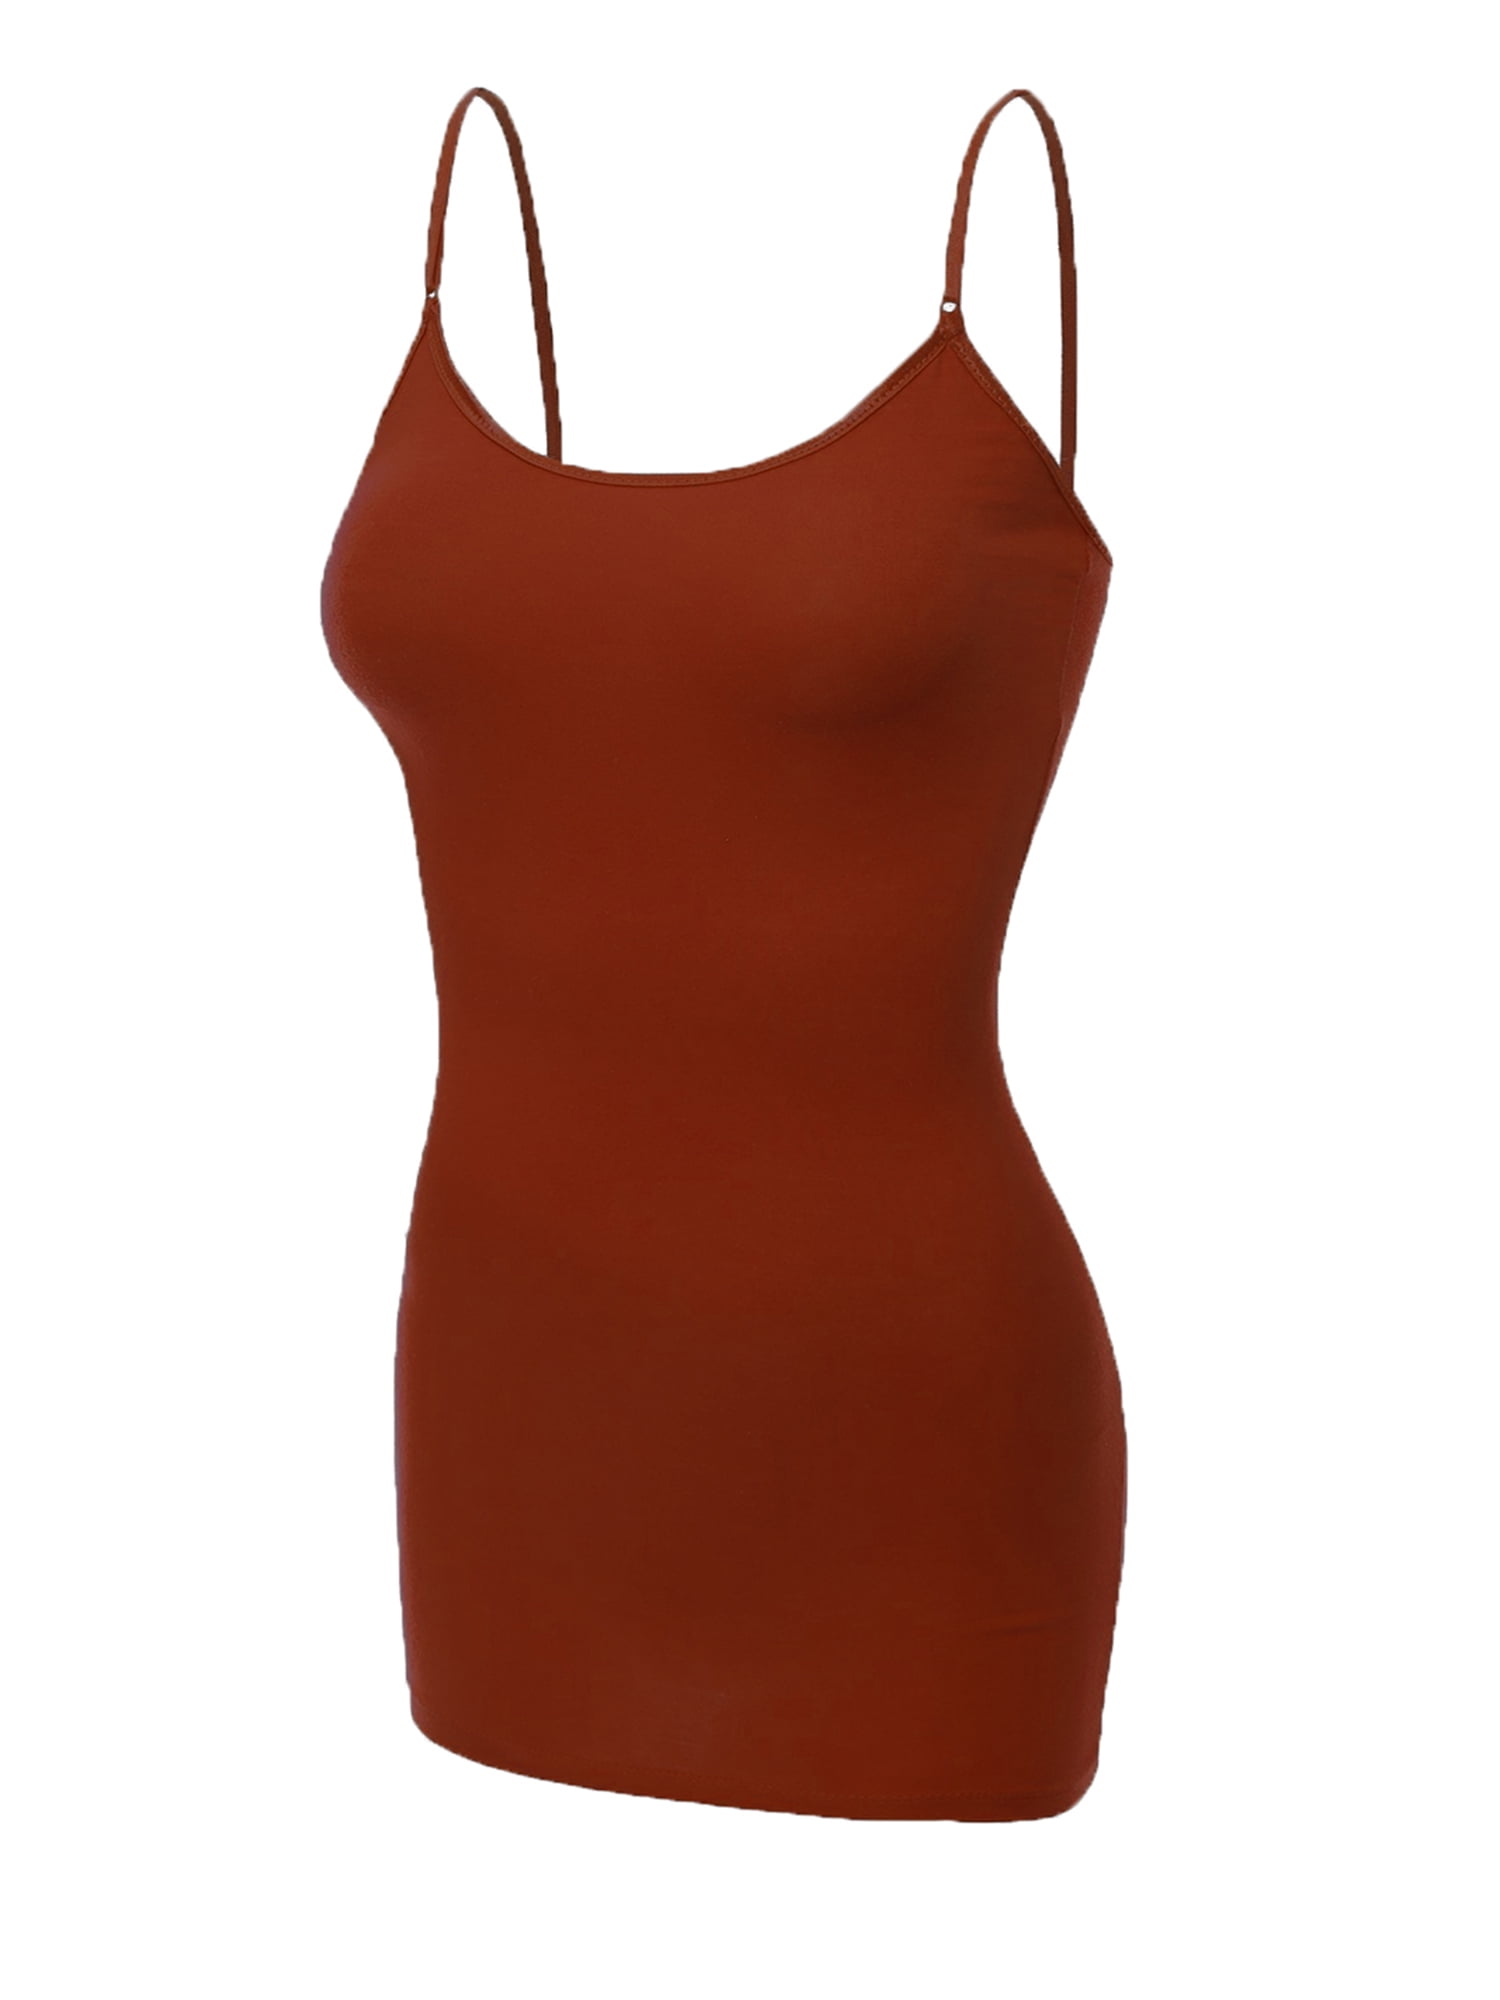 Essential Basic Women's Basic Casual Long Camisole Cami Top Plus Sizes -  Burgundy, 2XL 